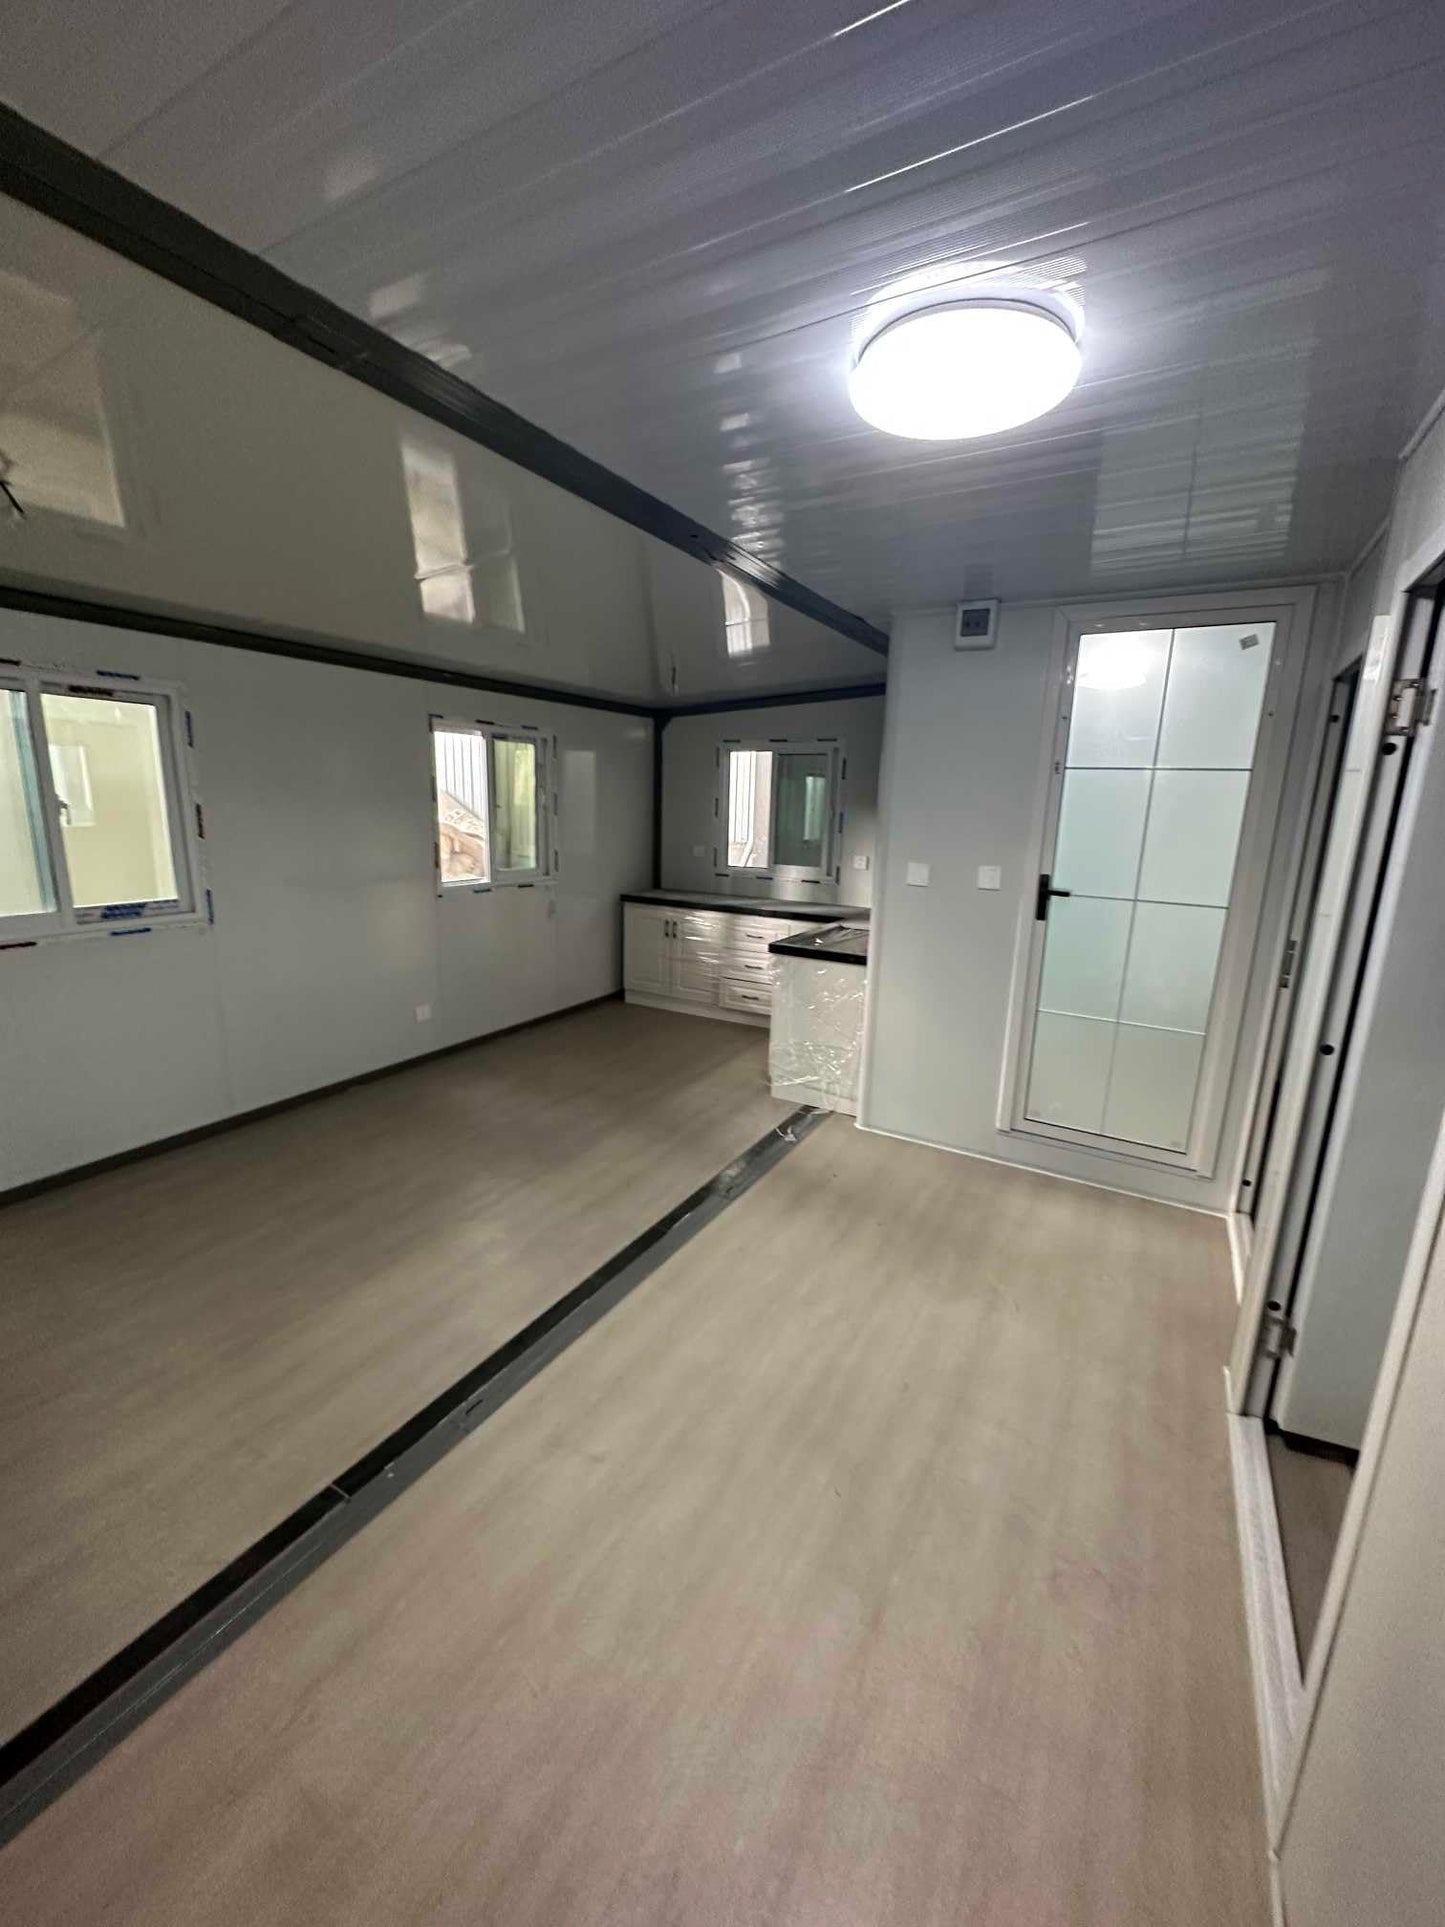 Prefabricated,Foldable,Portable Container House 3 Bedrooms 1 Bathroom 1 Kitchen 1 Living Room with Windows and Doors.